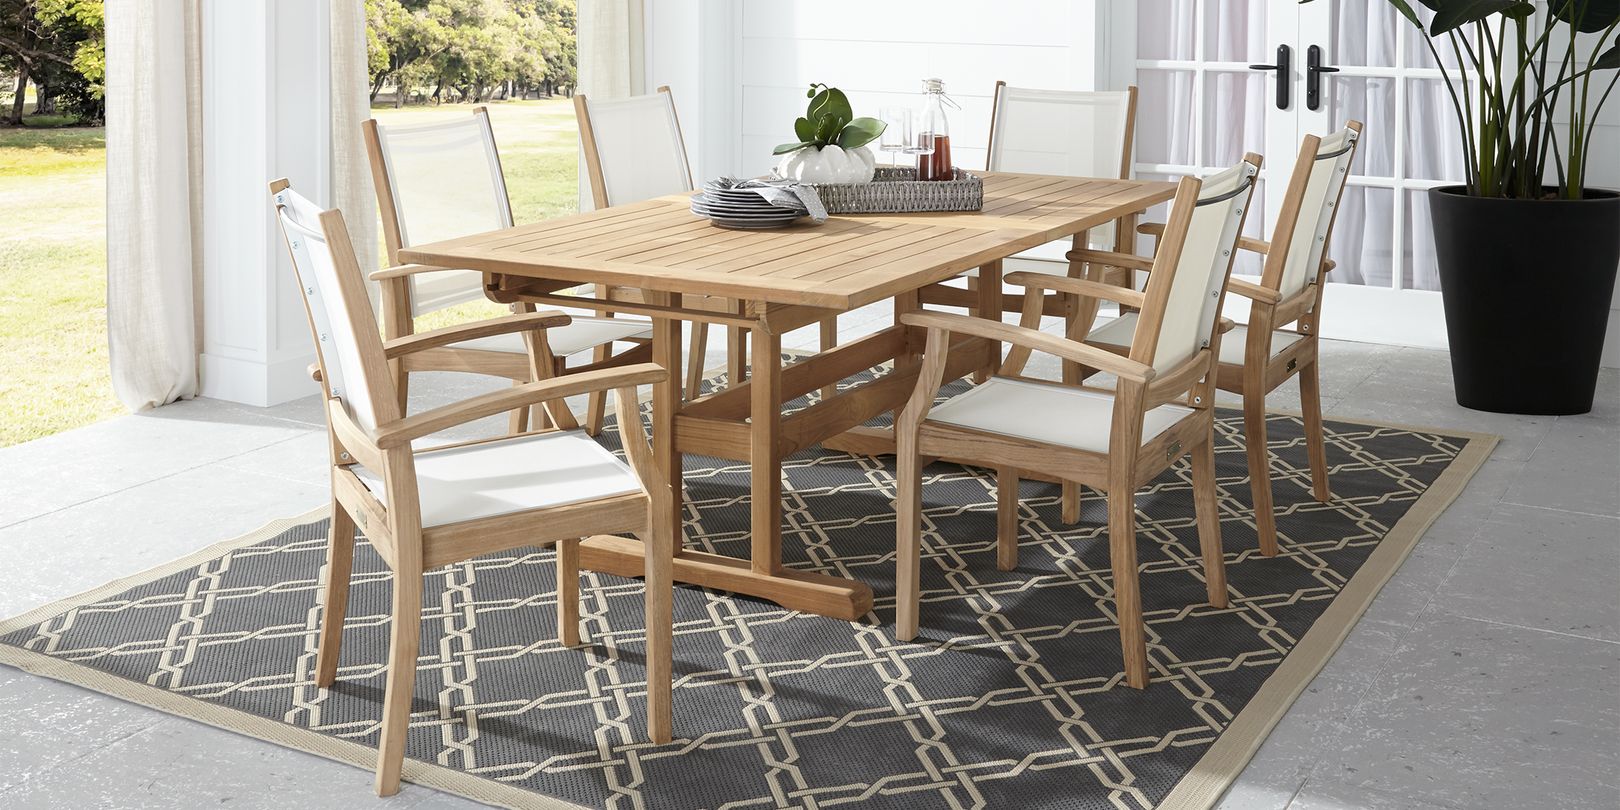 Photo of Teak Rectangular Table with Chairs